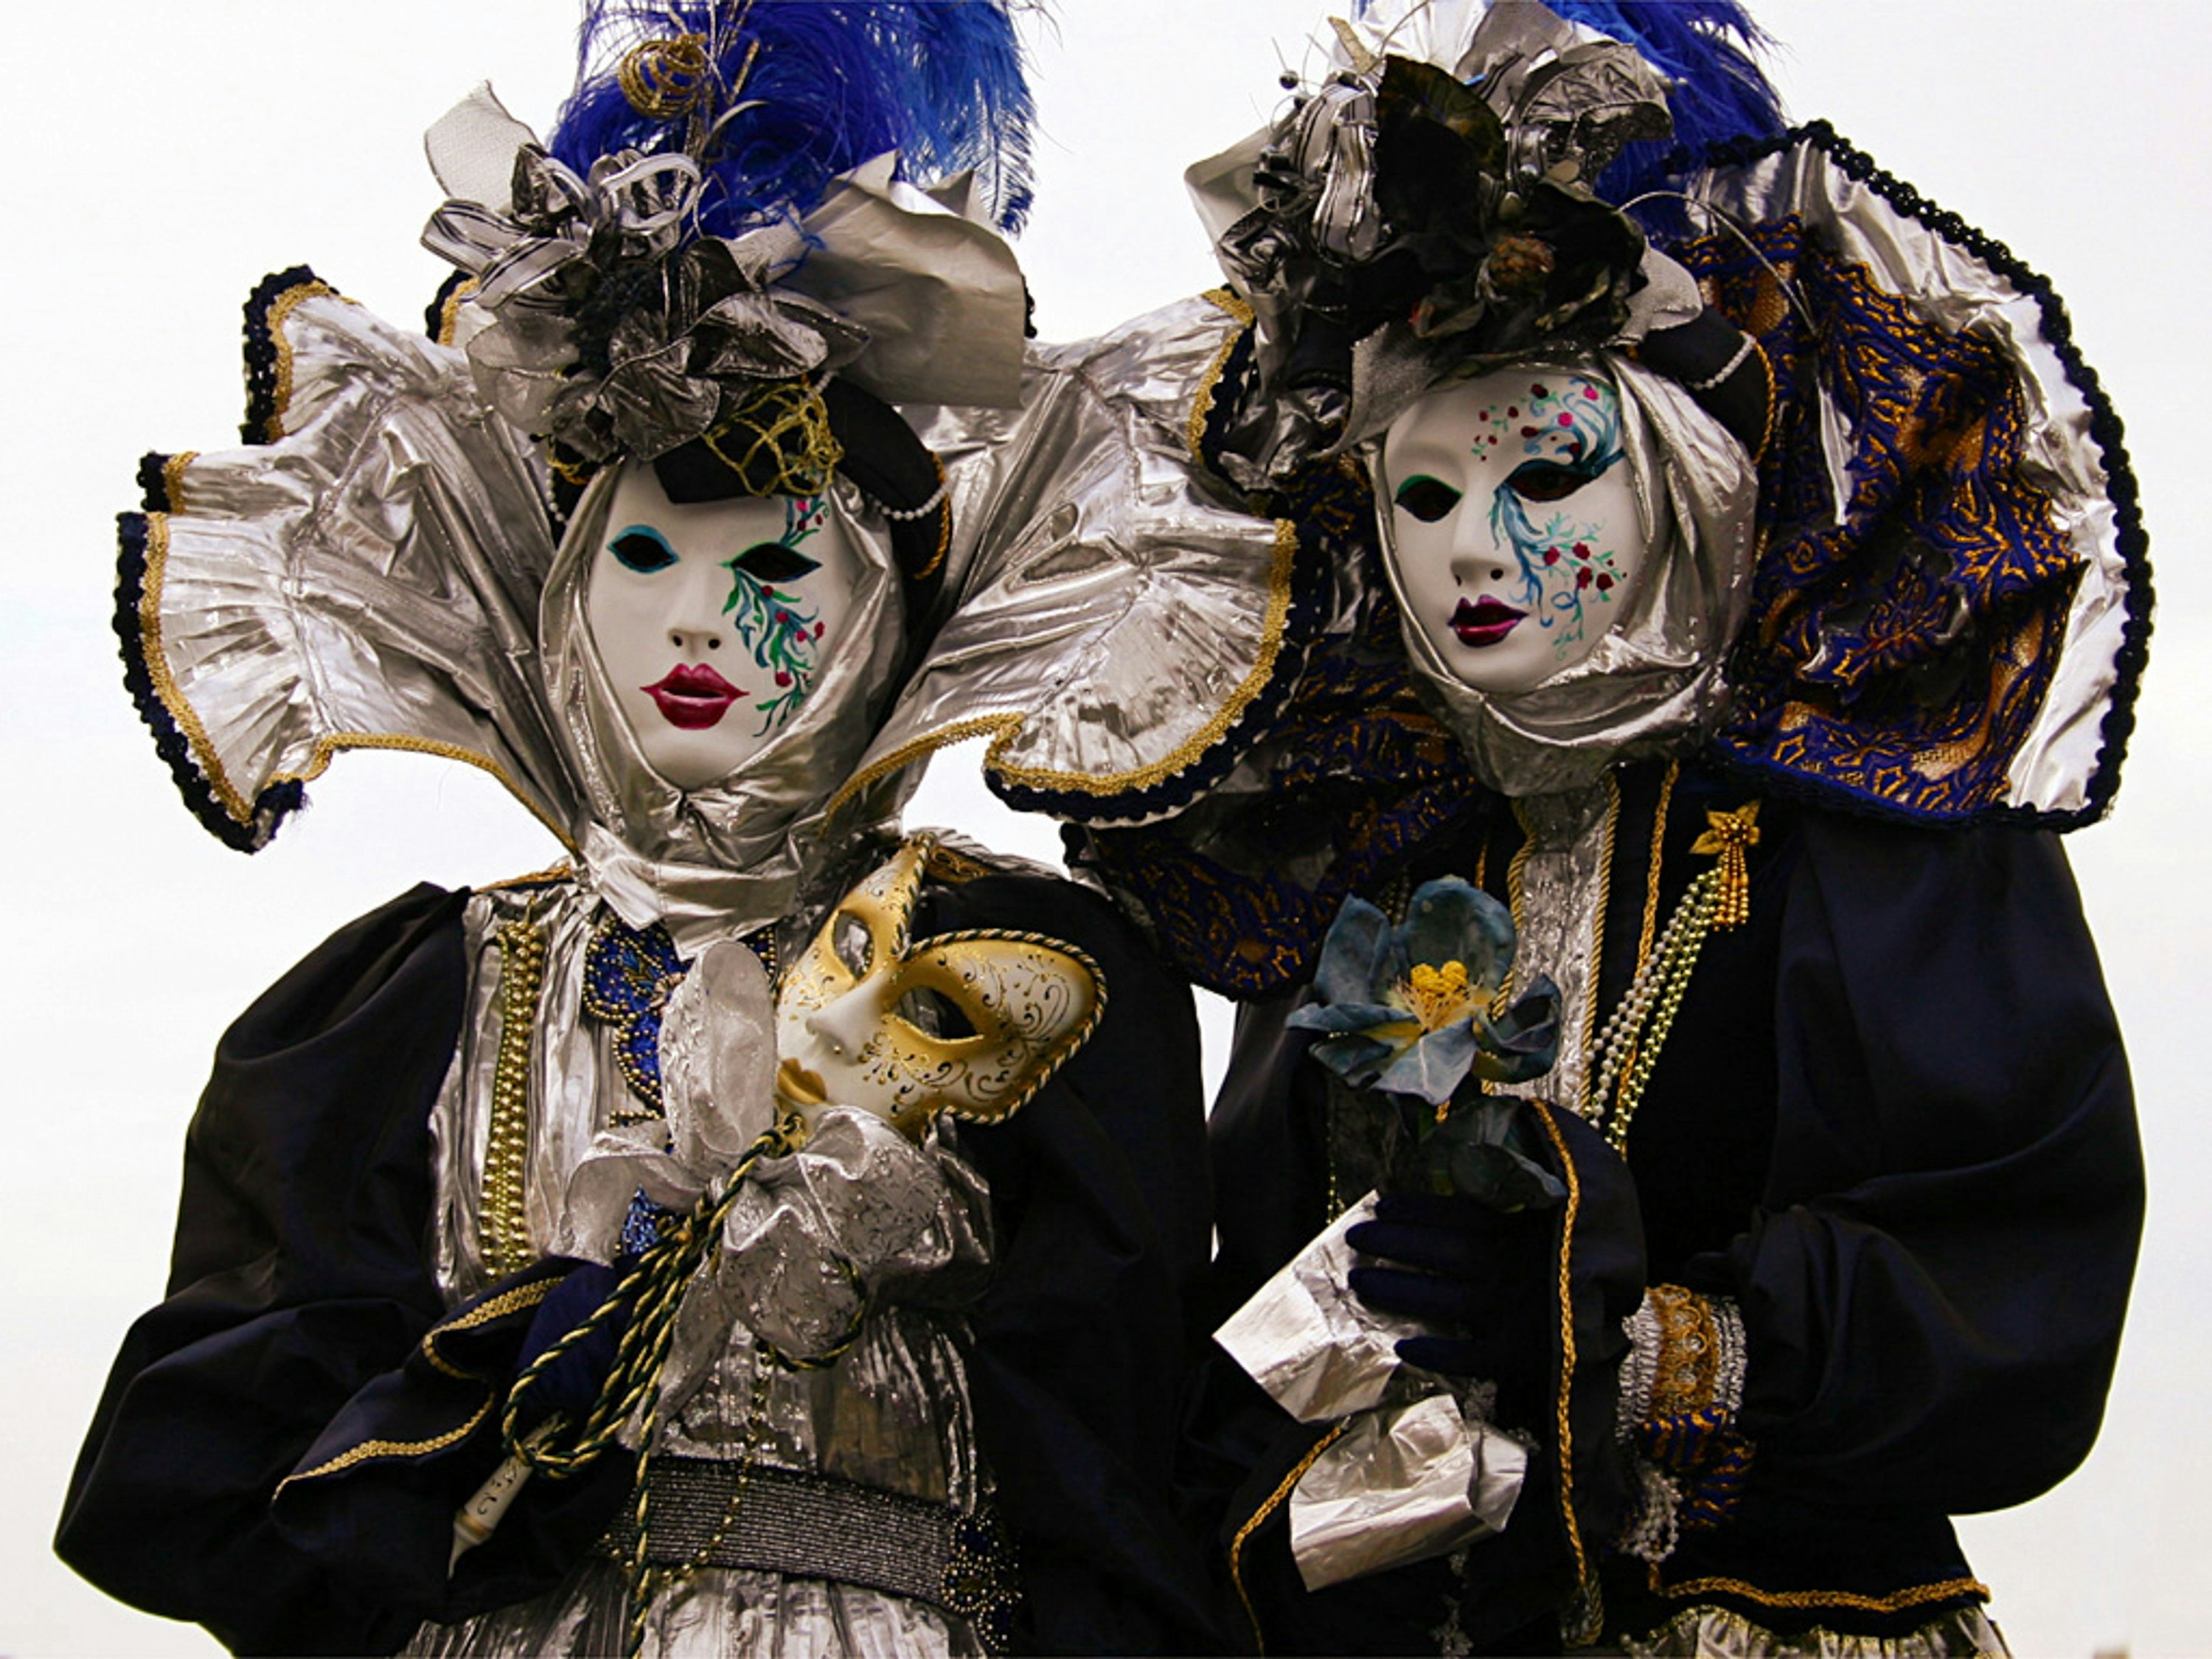 The Carnival of Venice (Italian: Carnevale di Venezia) is an annual festival held in Venice, Italy. The carnival ends on Shrove Tuesday (Martedì Grasso or Mardi Gras), which is the day before the start of Lent on Ash Wednesday. The festival is world-famous for its elaborate masks.